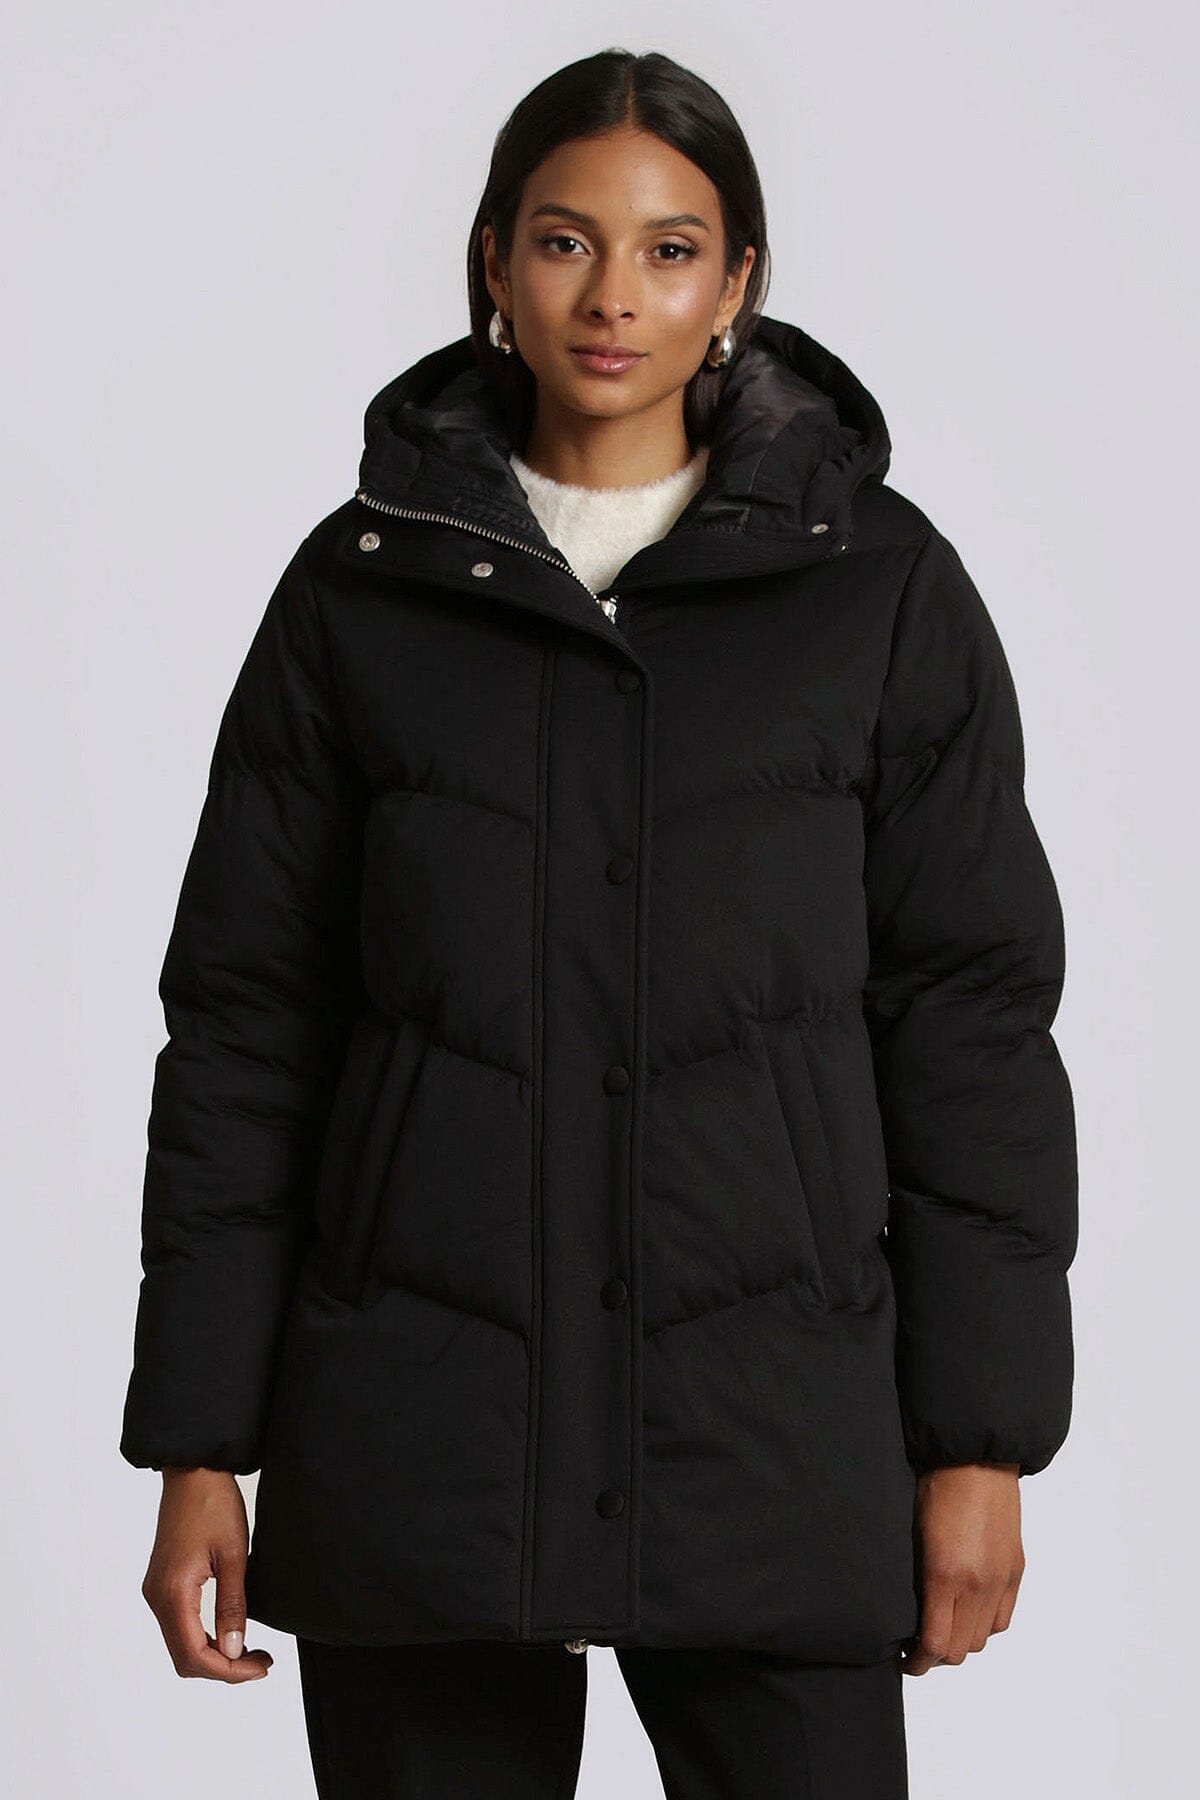 Black thermal puff cloud duvet hooded puffer coat jacket - figure flattering water resistant fashion puffers jackets for ladies